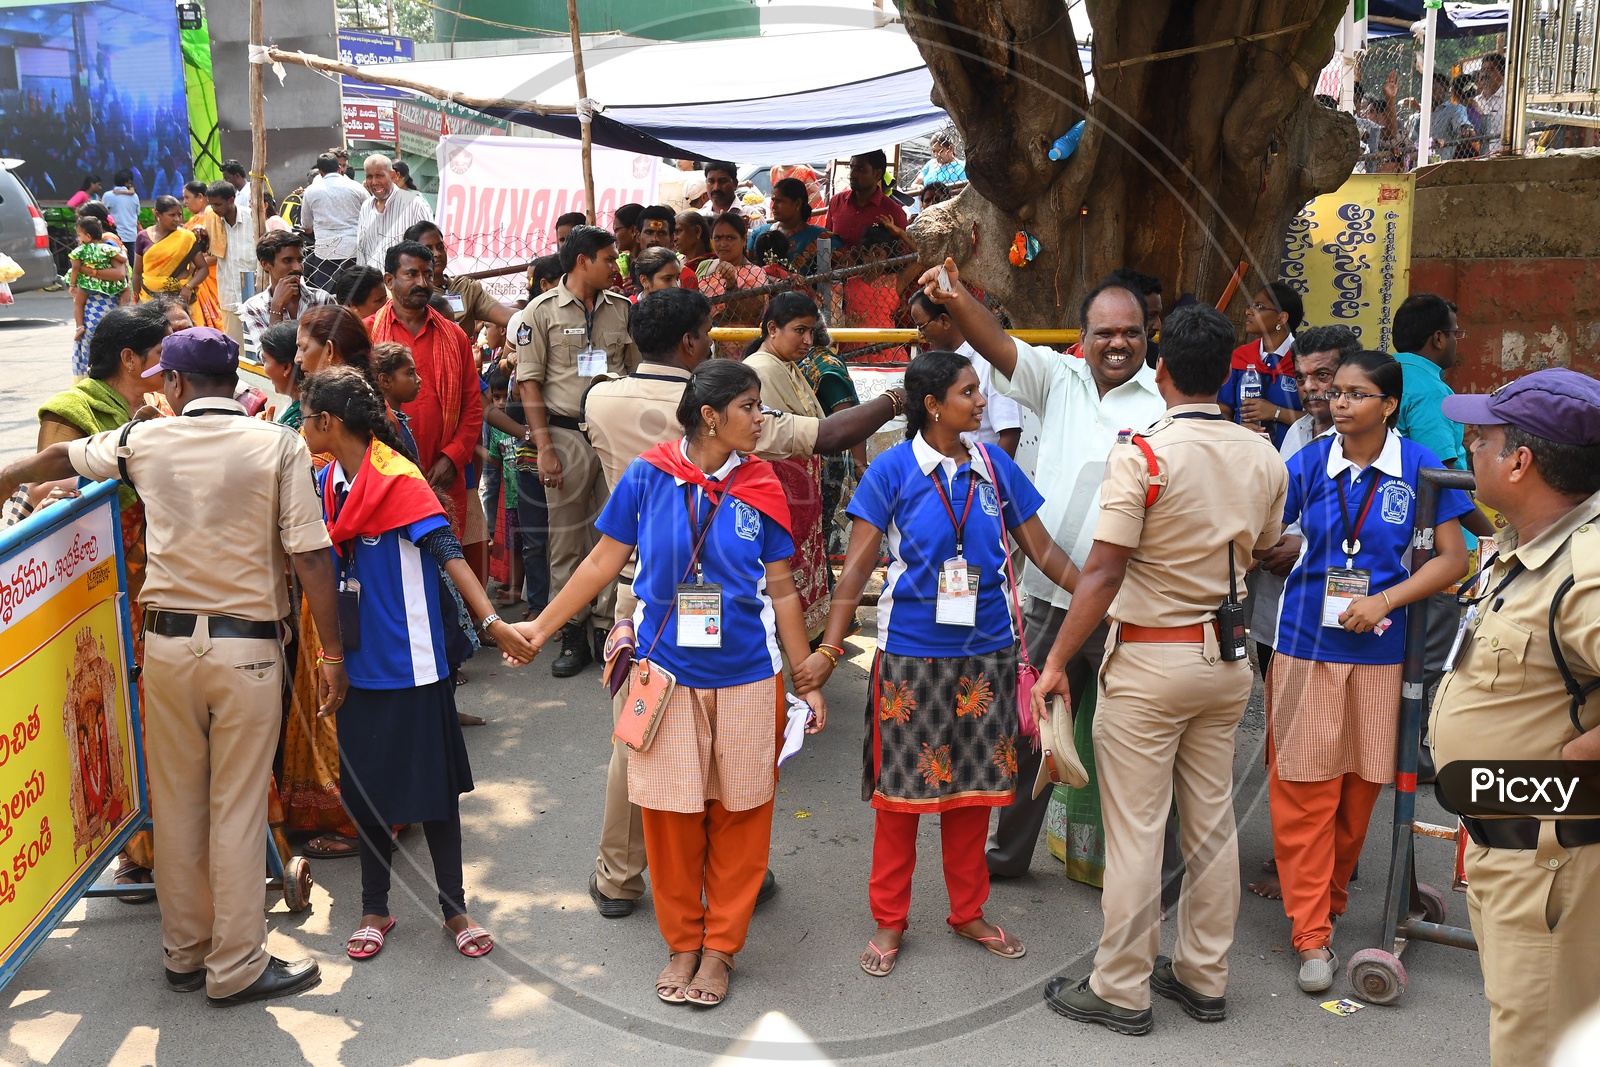 Police Personnel For Security or Vigilance At Darshan Queue Lines During Durga Navratri Festivals